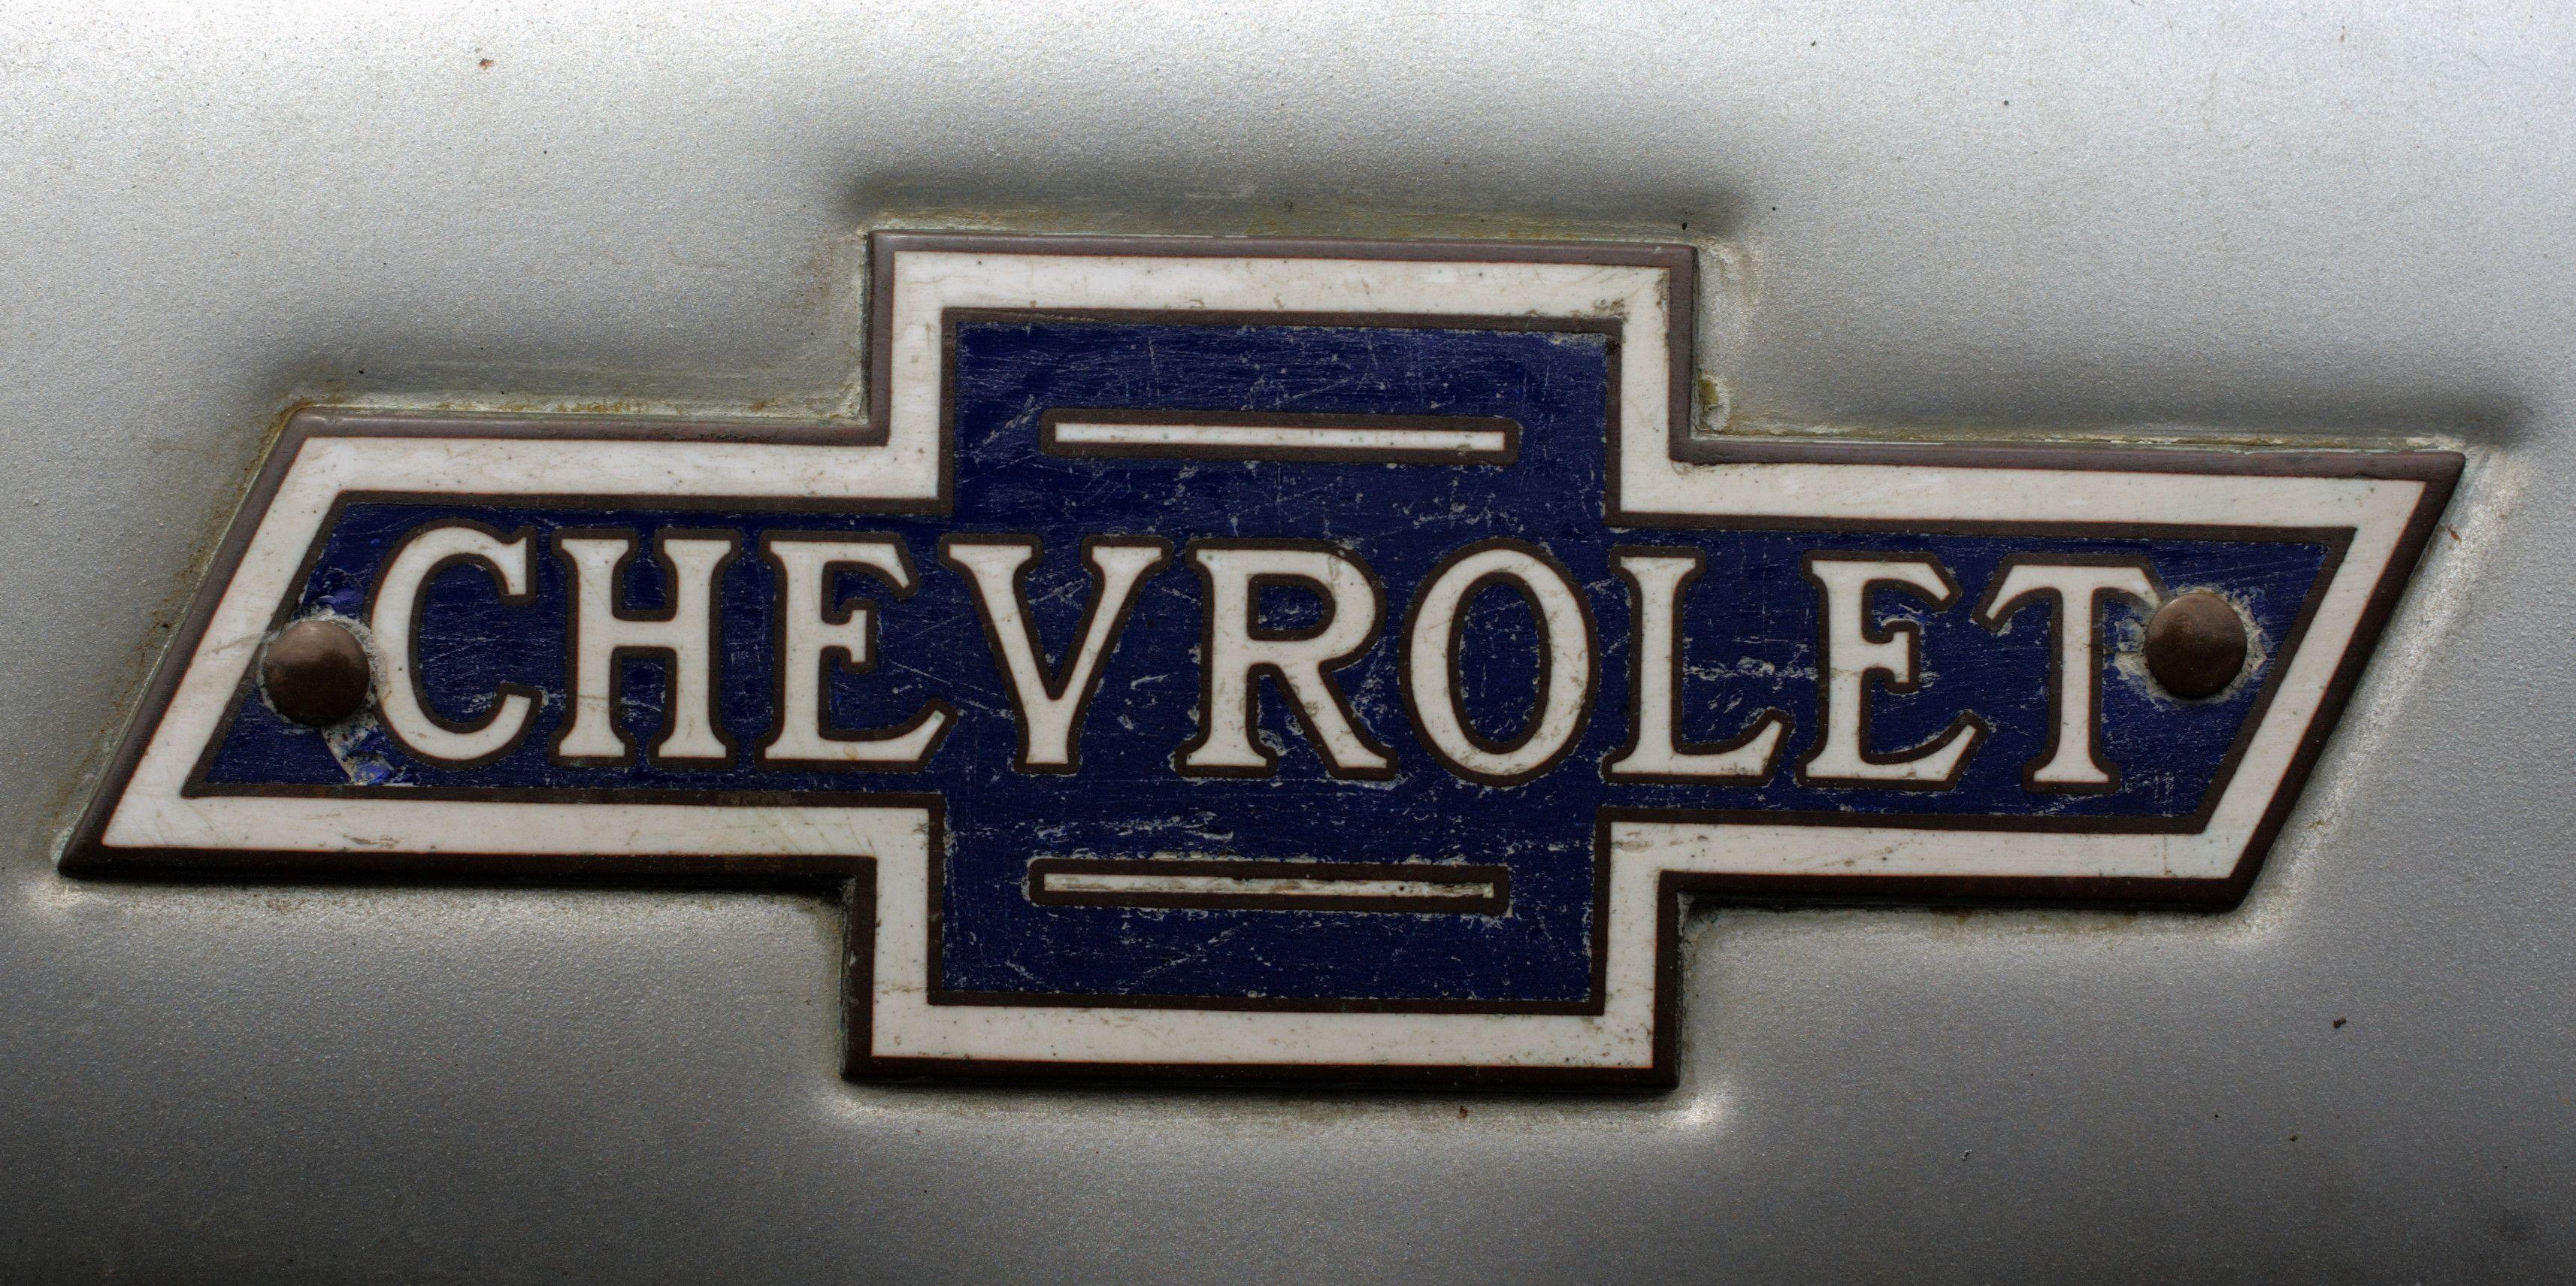 Old Chevrolet Logo - Chevy Logo, Chevrolet Car Symbol Meaning and History | Car Brand ...